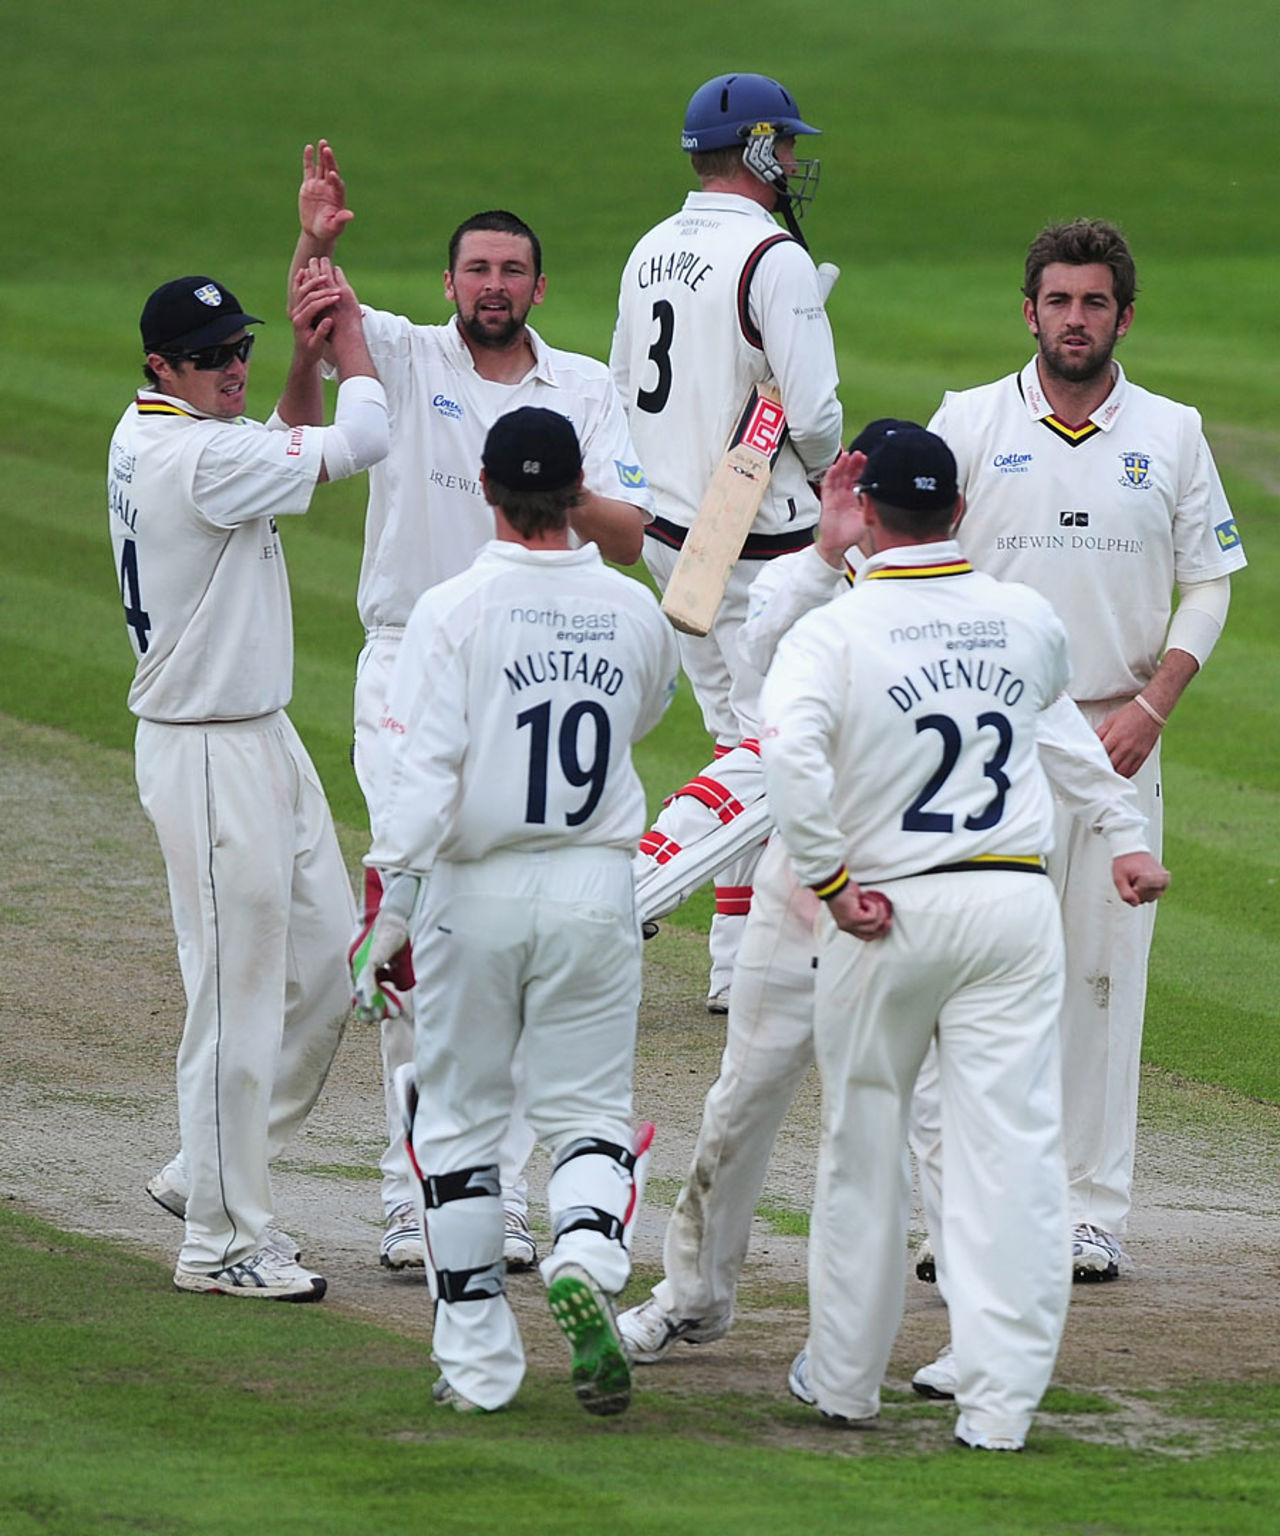 Steve Harmison is congratulated by his team-mates after removing  Glen Chapple, Lancashire v Durham, County Championship, Division One, Old Trafford, August 10, 2010